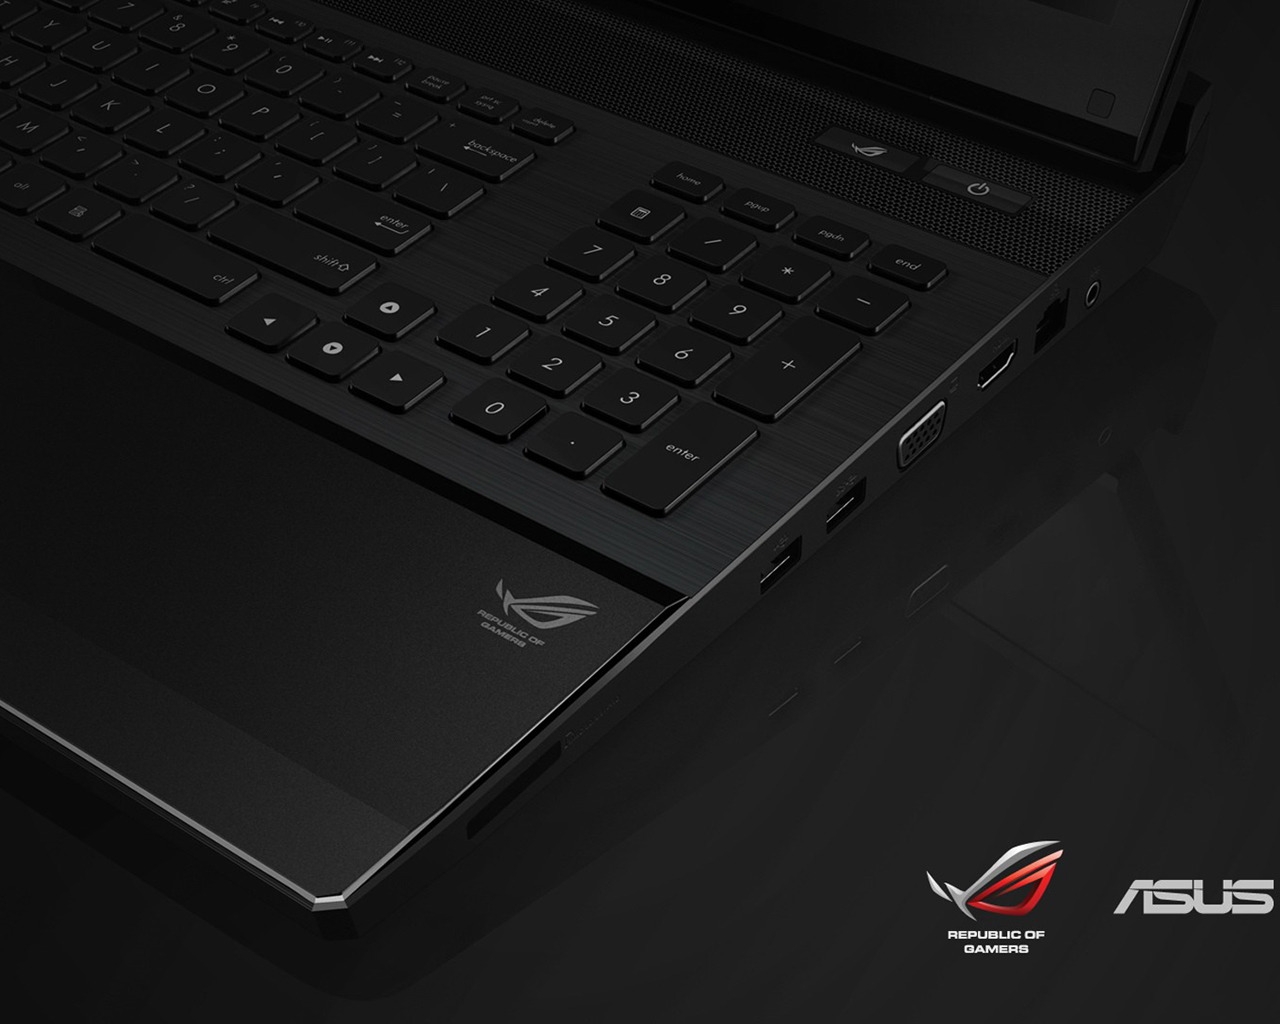 Asus Republic of Gamers for 1280 x 1024 resolution